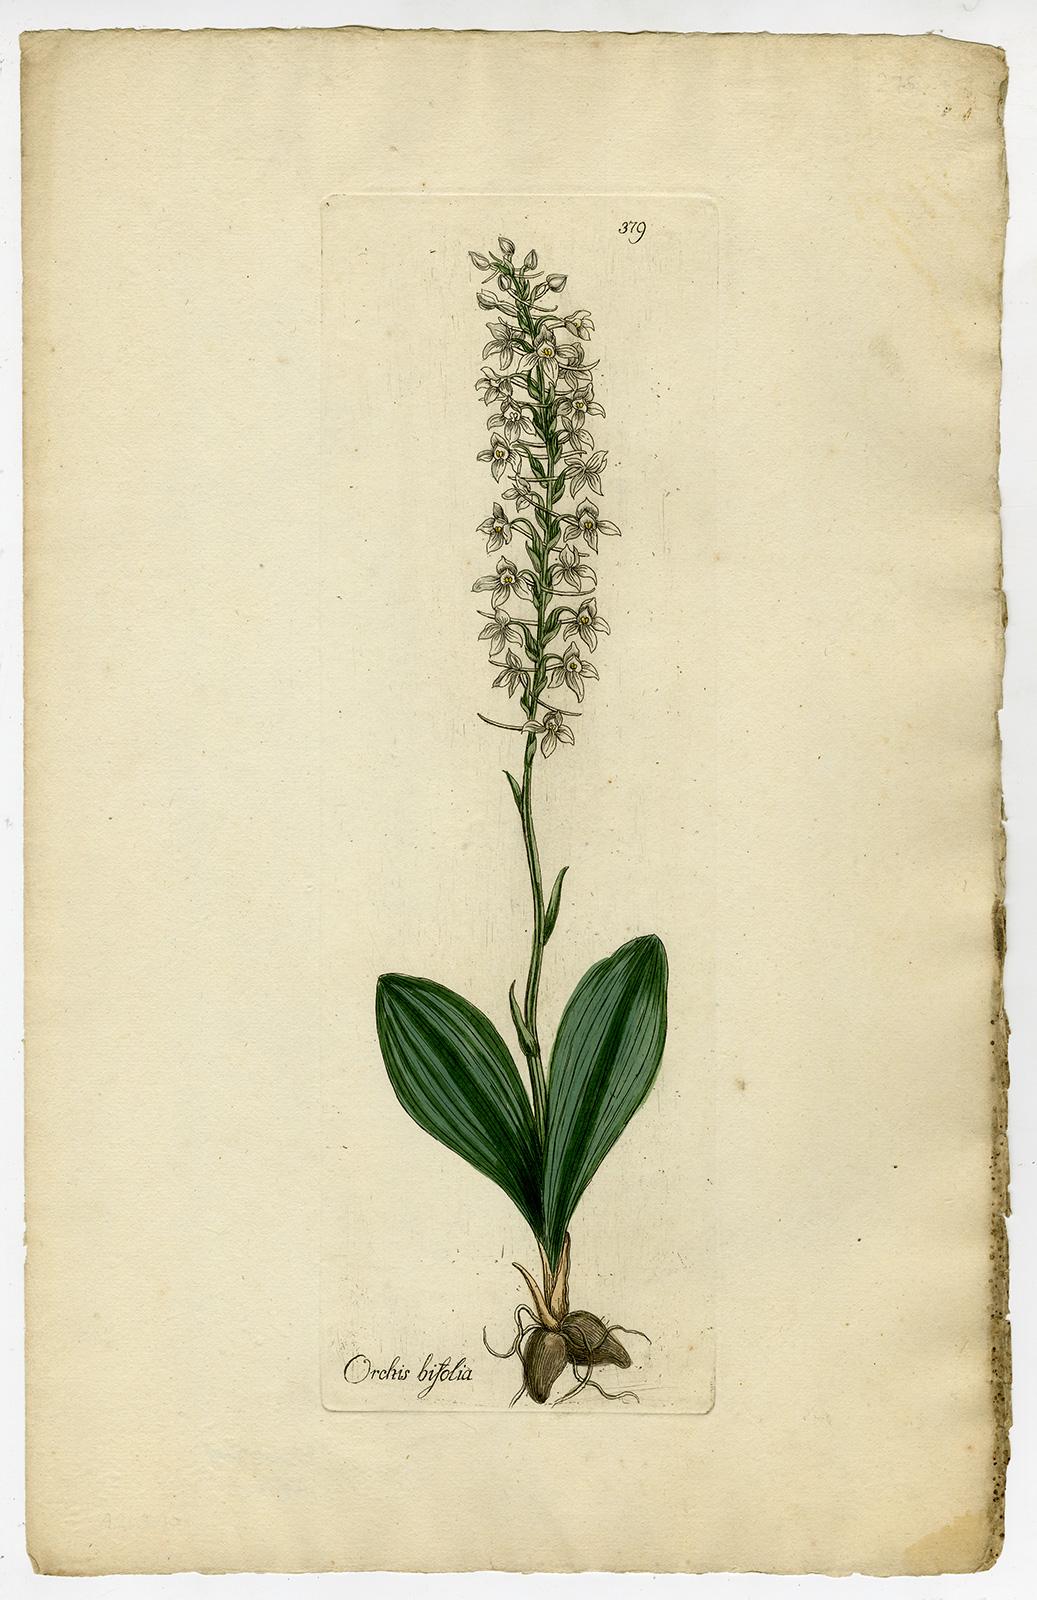 Lesser Butterfly-Orchid - Medicinal Plants by Happe - Handcoloured - 18th c. - Print by Andreas Friedrich Happe